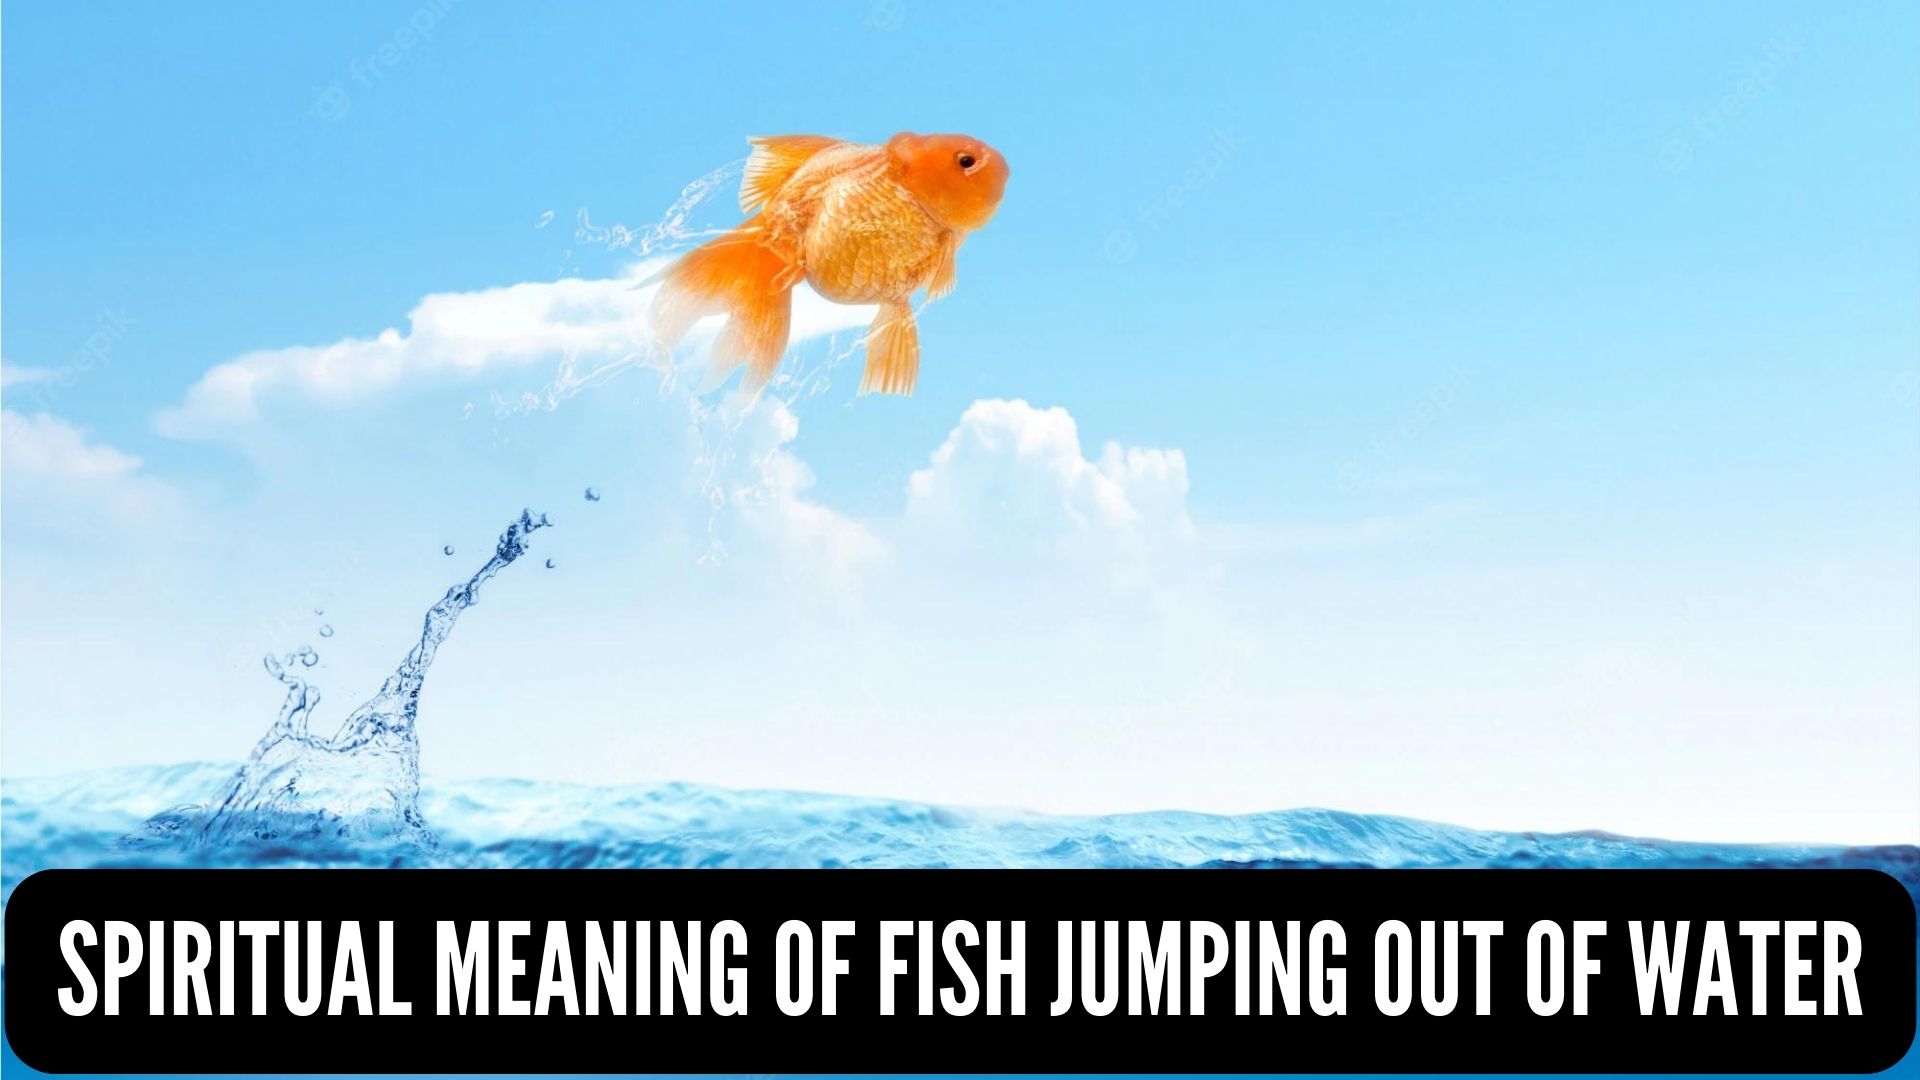 Spiritual Meaning Of Fish Jumping Out Of Water - Symbolizes Peace And Tranquility